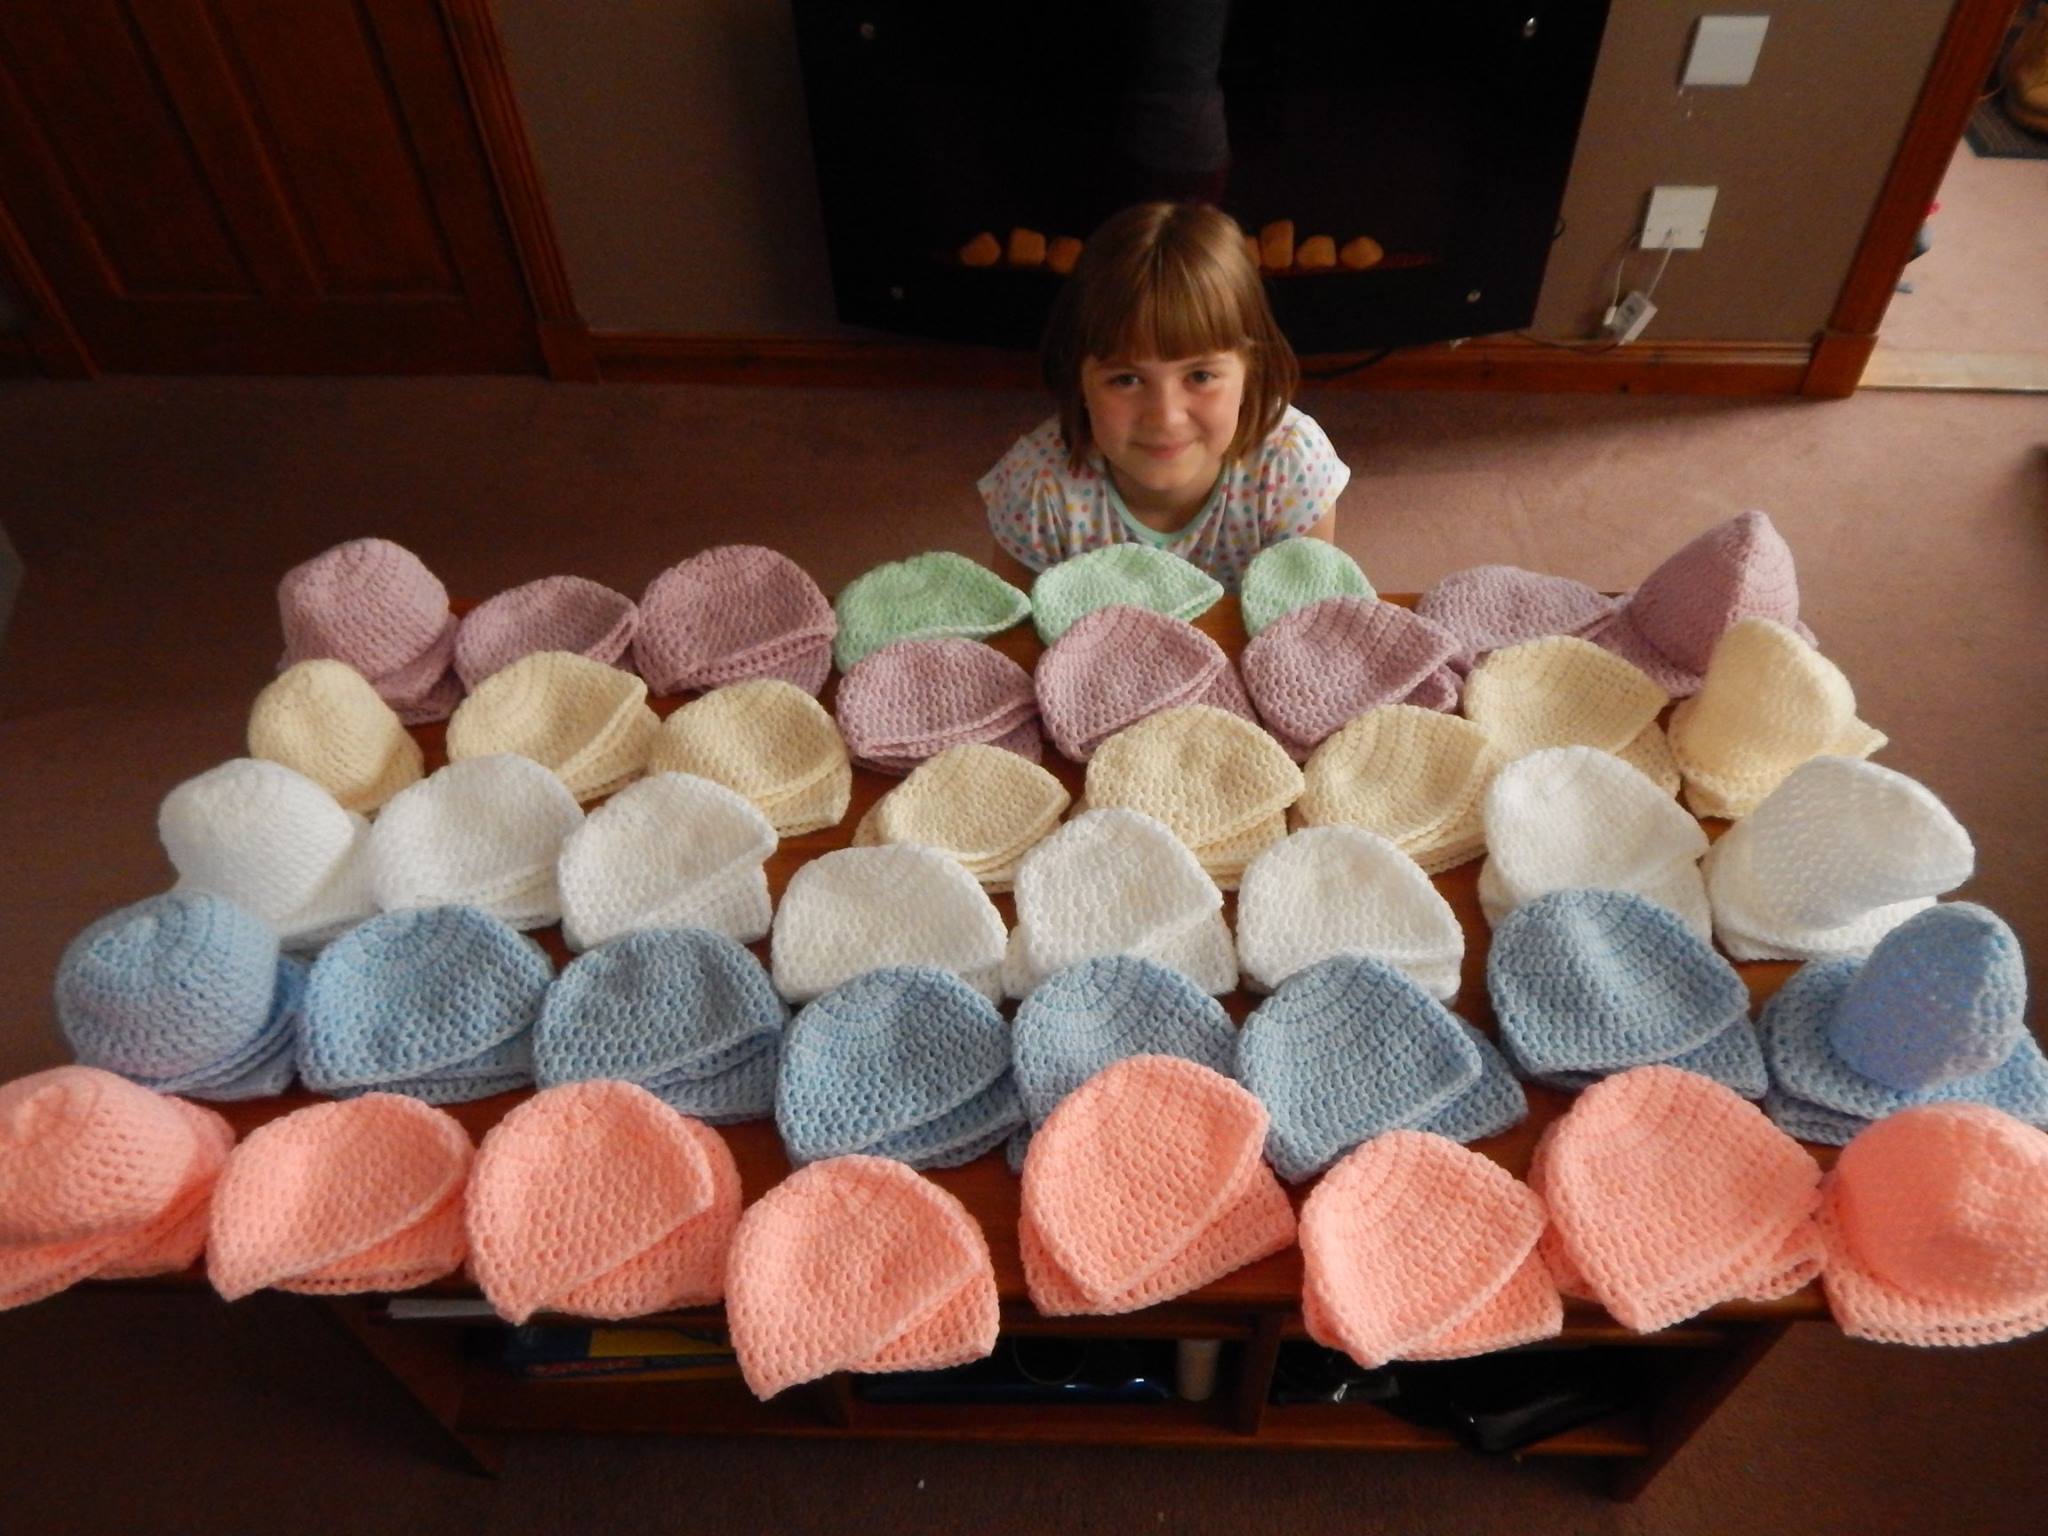 Chloe Milne spent countless hours over the holidays knitting the tiny garments for infants in Dr Gray's Hospital in Elgin